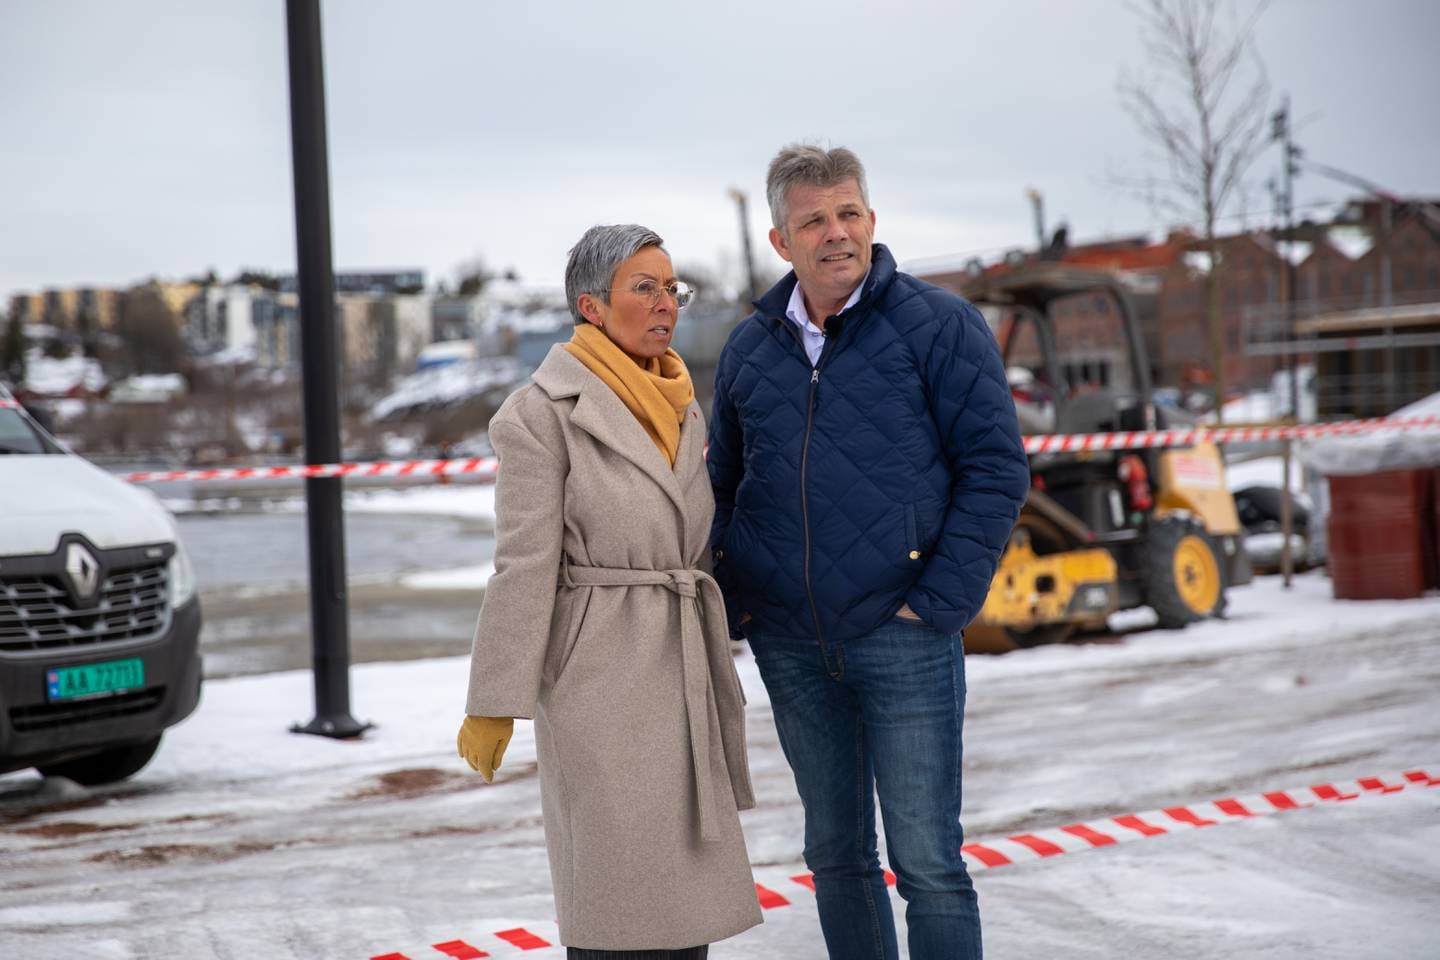 Fisheries and Oceans Minister Bjørnar Skjæran with marsh mayor Hanne Tollerud inspecting the spill on Tuesday.